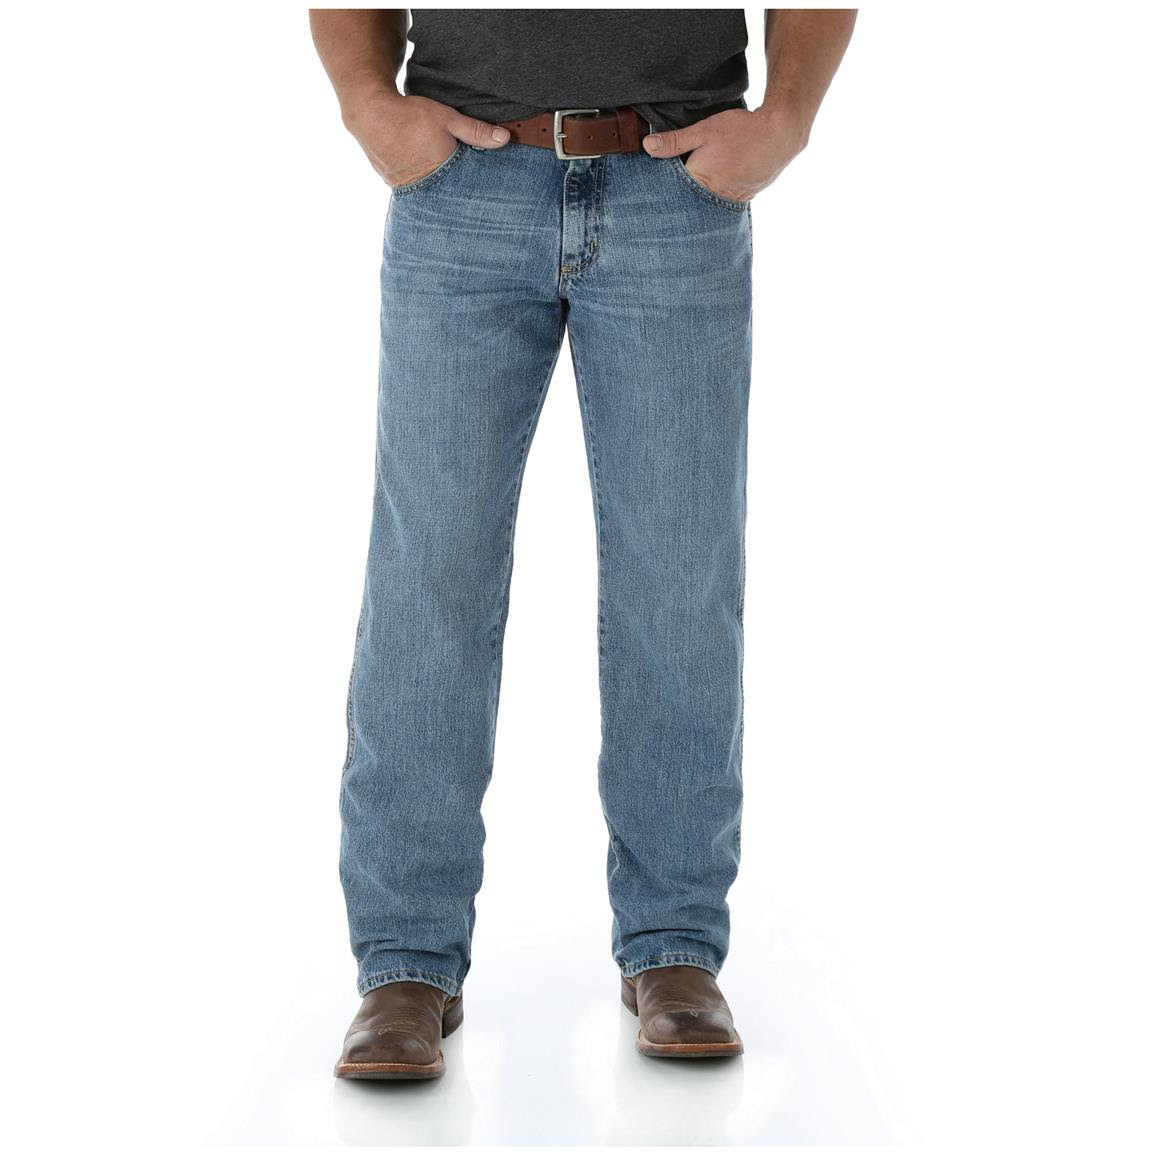 Wrangler Jeans Shop Straight Jeans Bedeutung Levis High Waisted Skinny Jeans May 2019